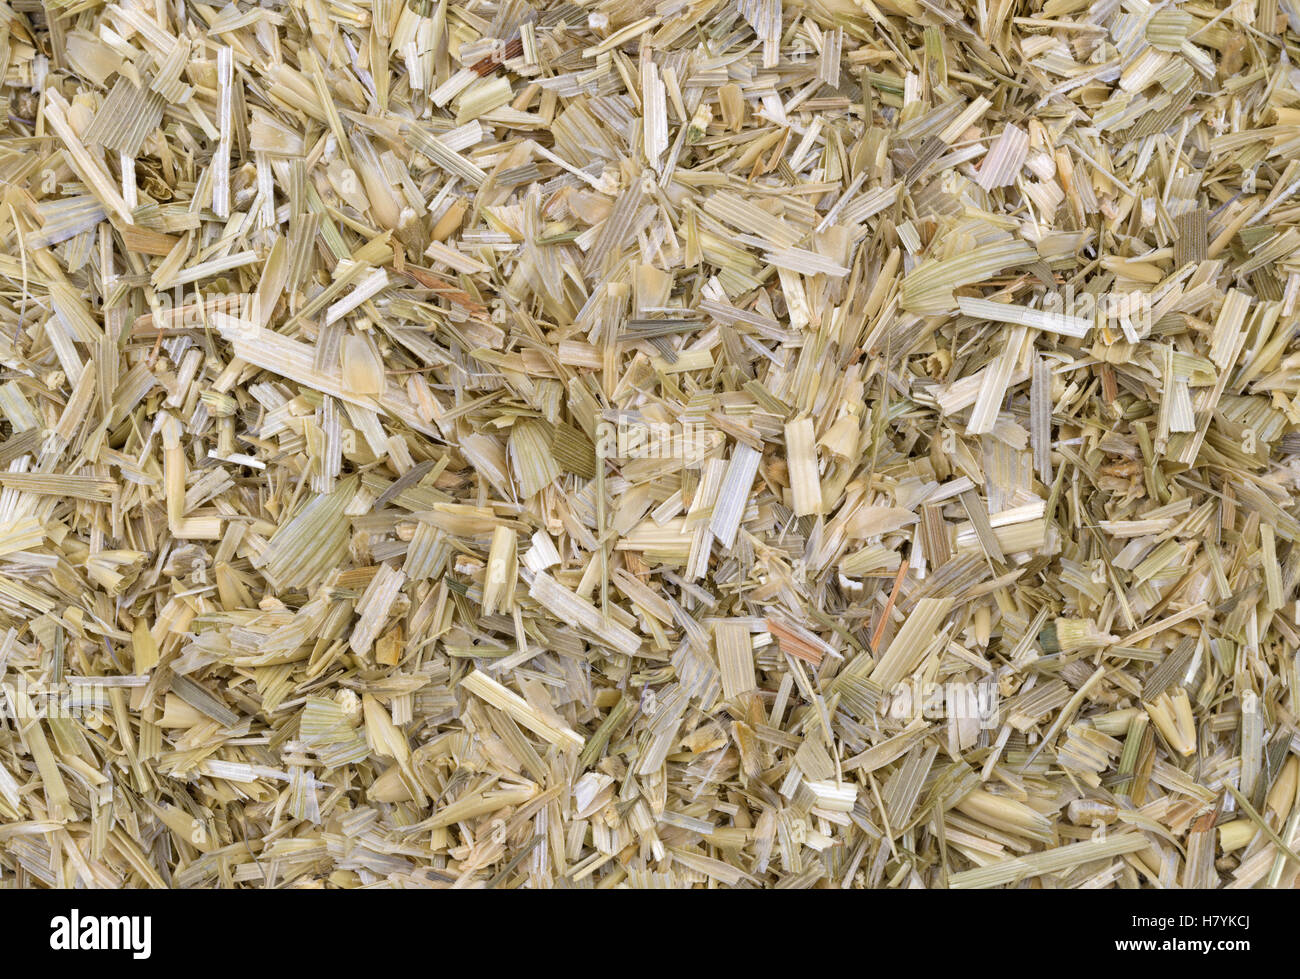 A very close view of dried and shredded oatstraw herb. Stock Photo